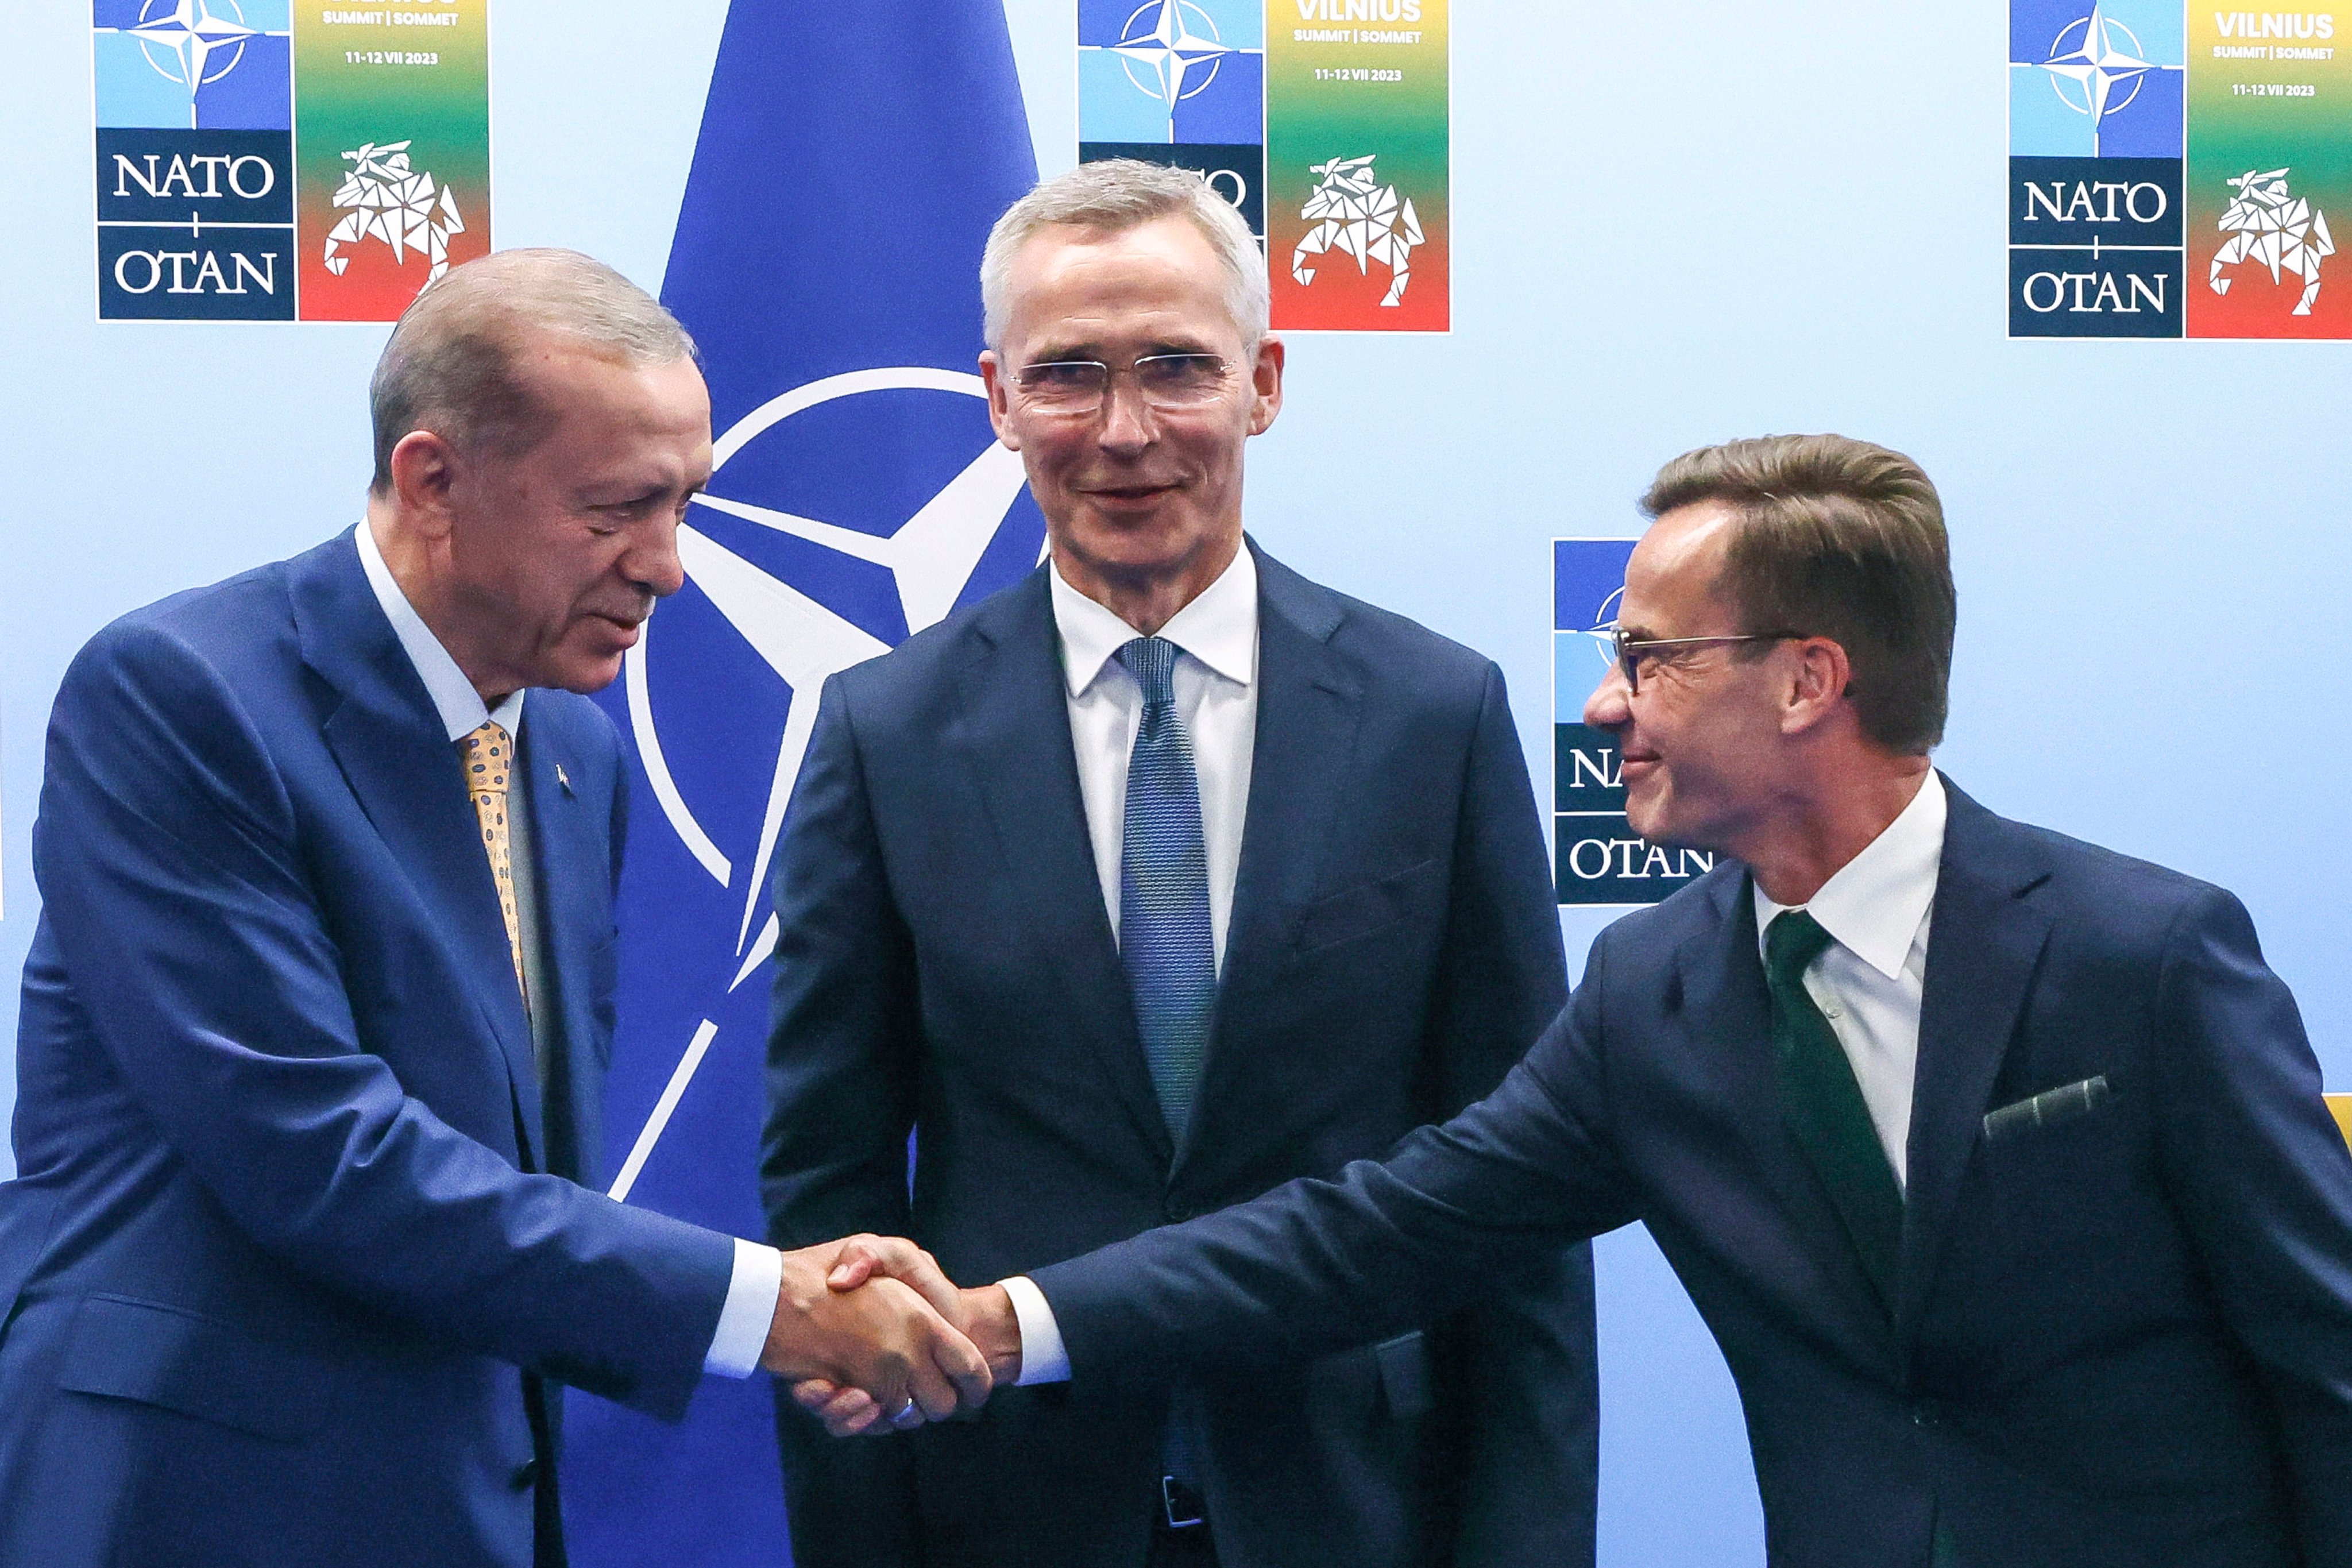 Turkey’s President Recep Tayyip Erdogan (left)  shakes hands with Sweden’s Prime Minister Ulf Kristersson (right), as Nato Secretary General Jens Stoltenberg looks on. Photo: Pool Photo via AP